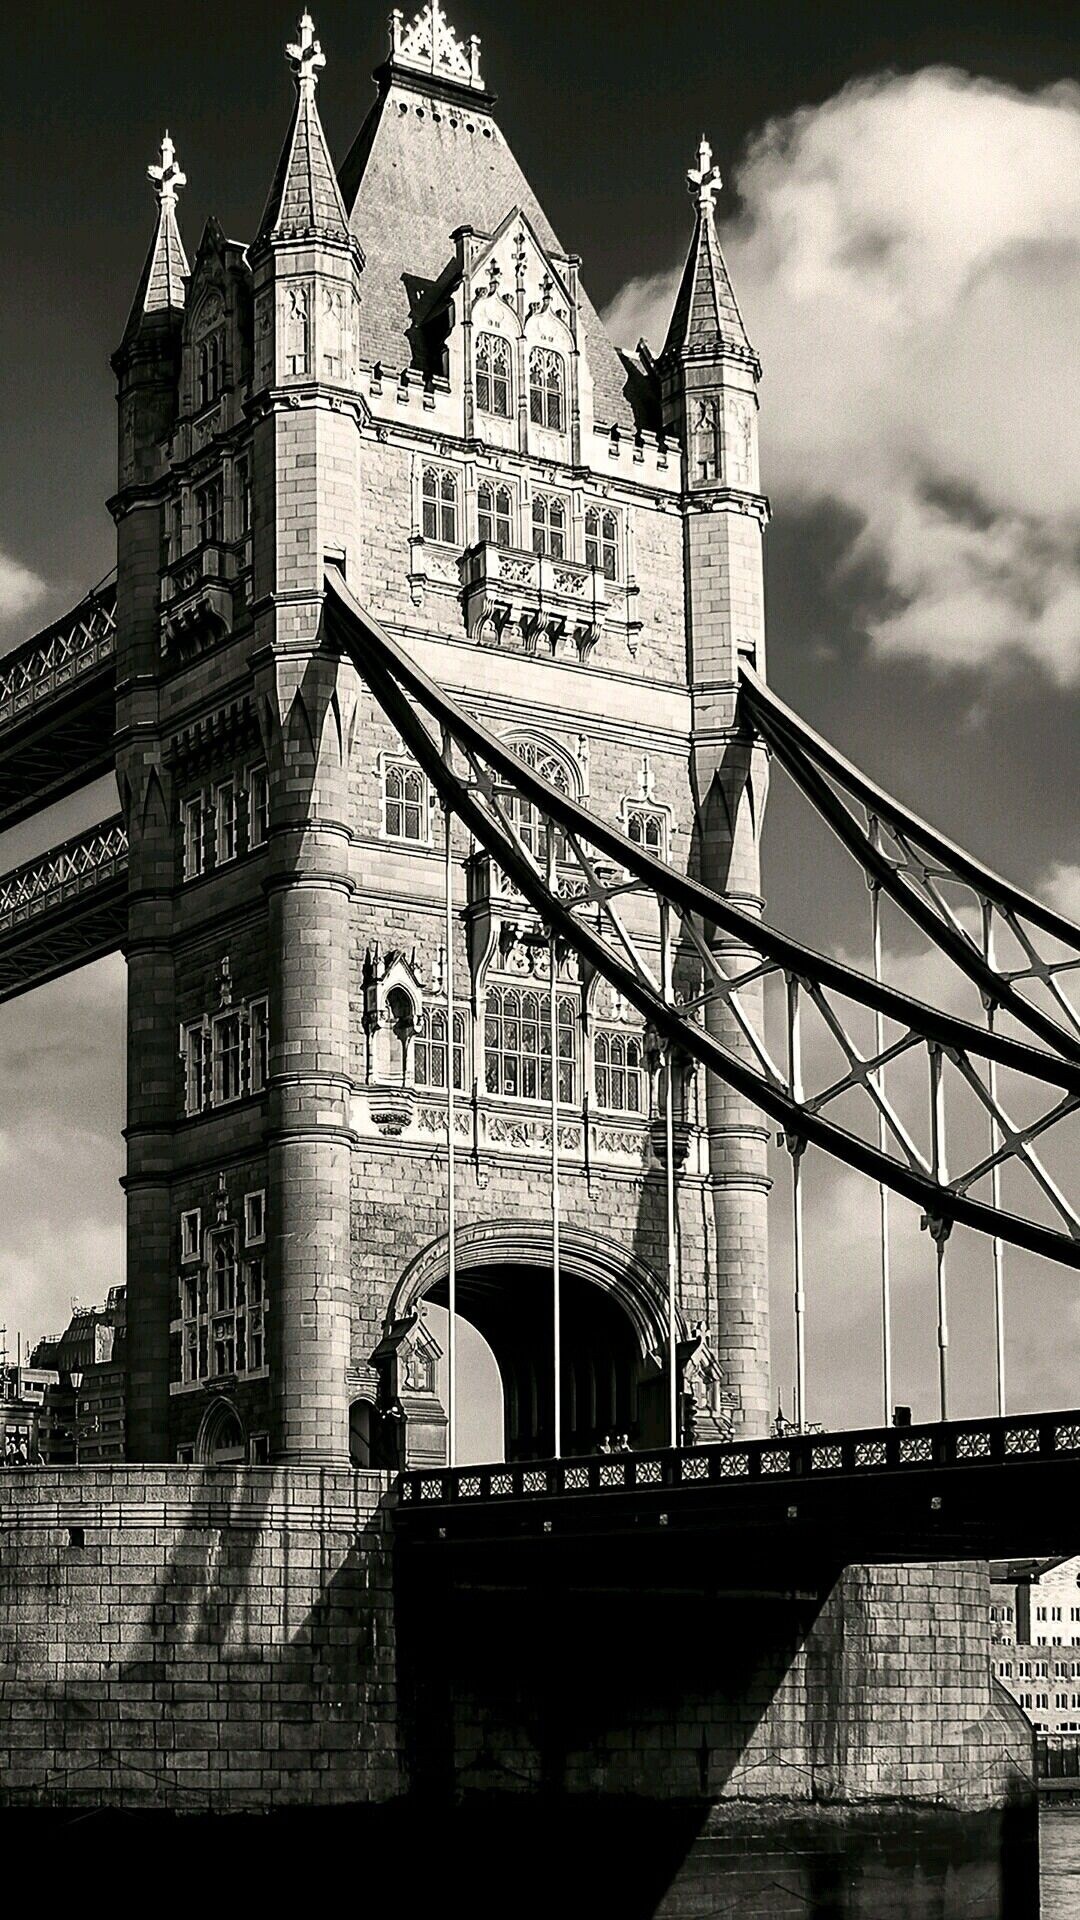 Tower Bridge: Iconic, modern-day symbol of London, Made up of more than 11,000 tons of steel. 1080x1920 Full HD Wallpaper.